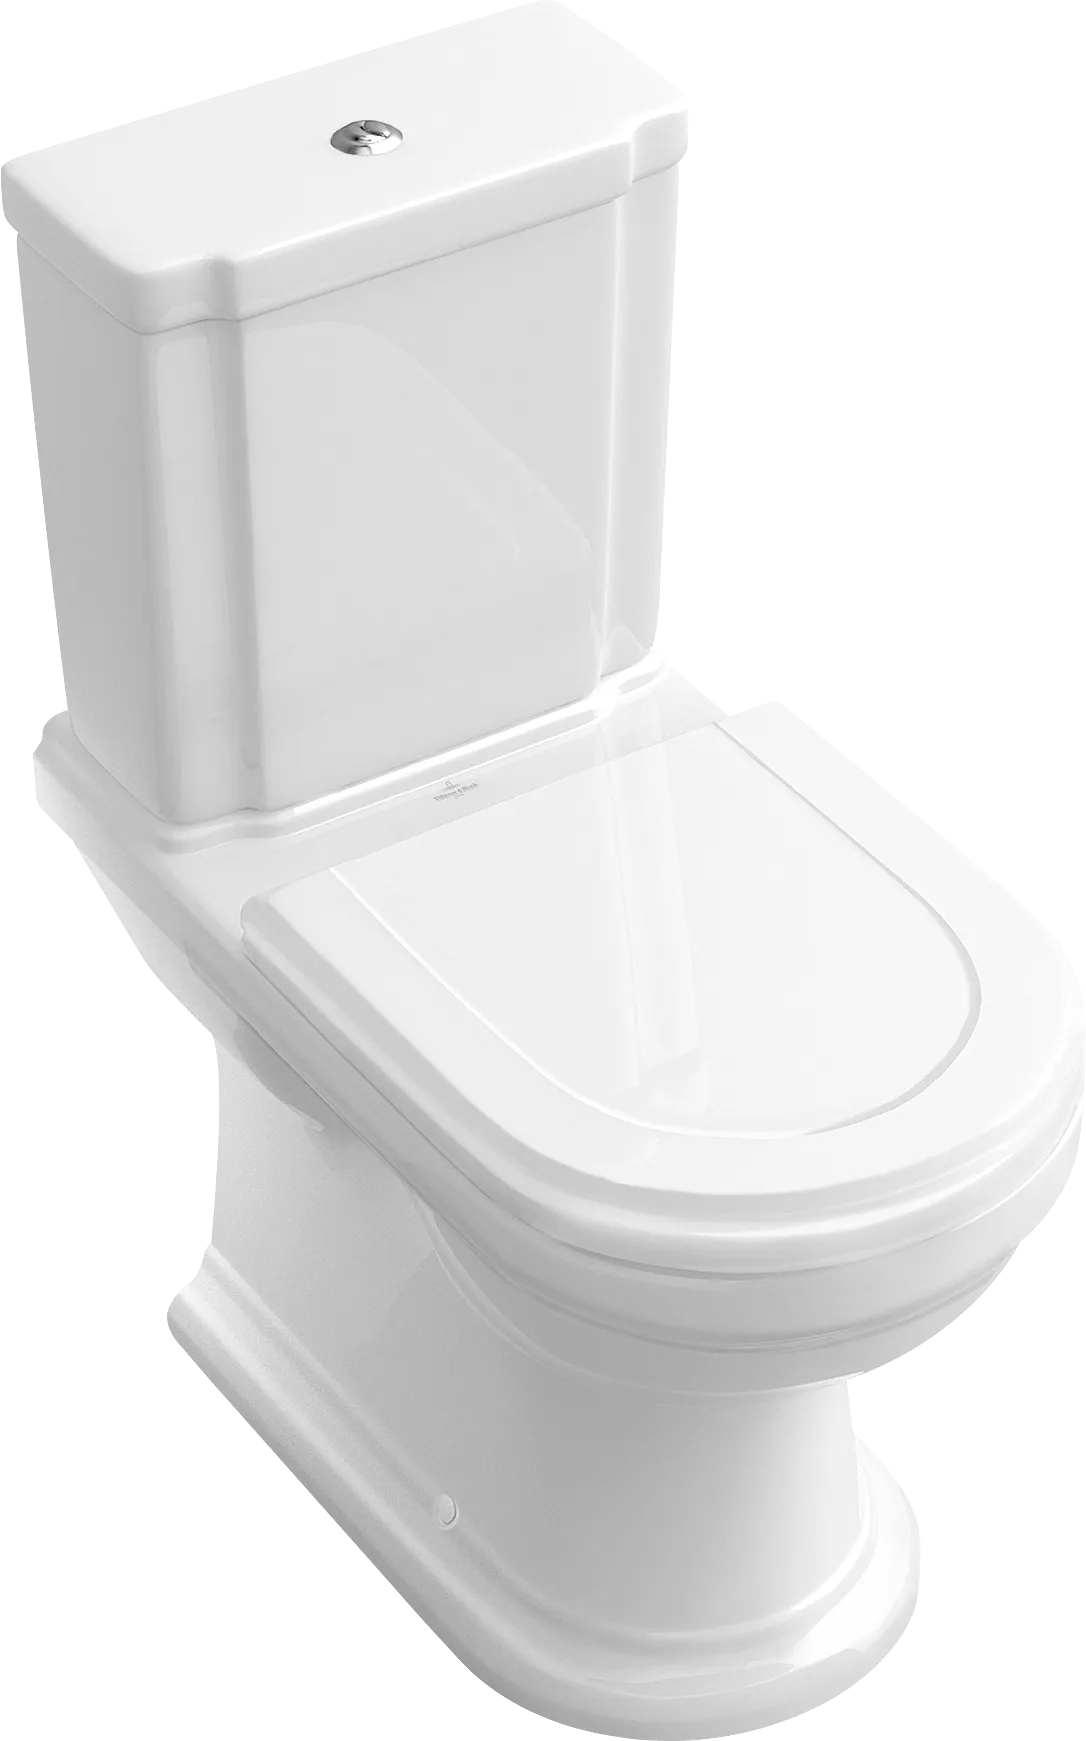 Picture of VILLEROY BOCH Hommage Washdown toilet for close-coupled WC-suite, floor-standing, Star White CeramicPlus #666210R2